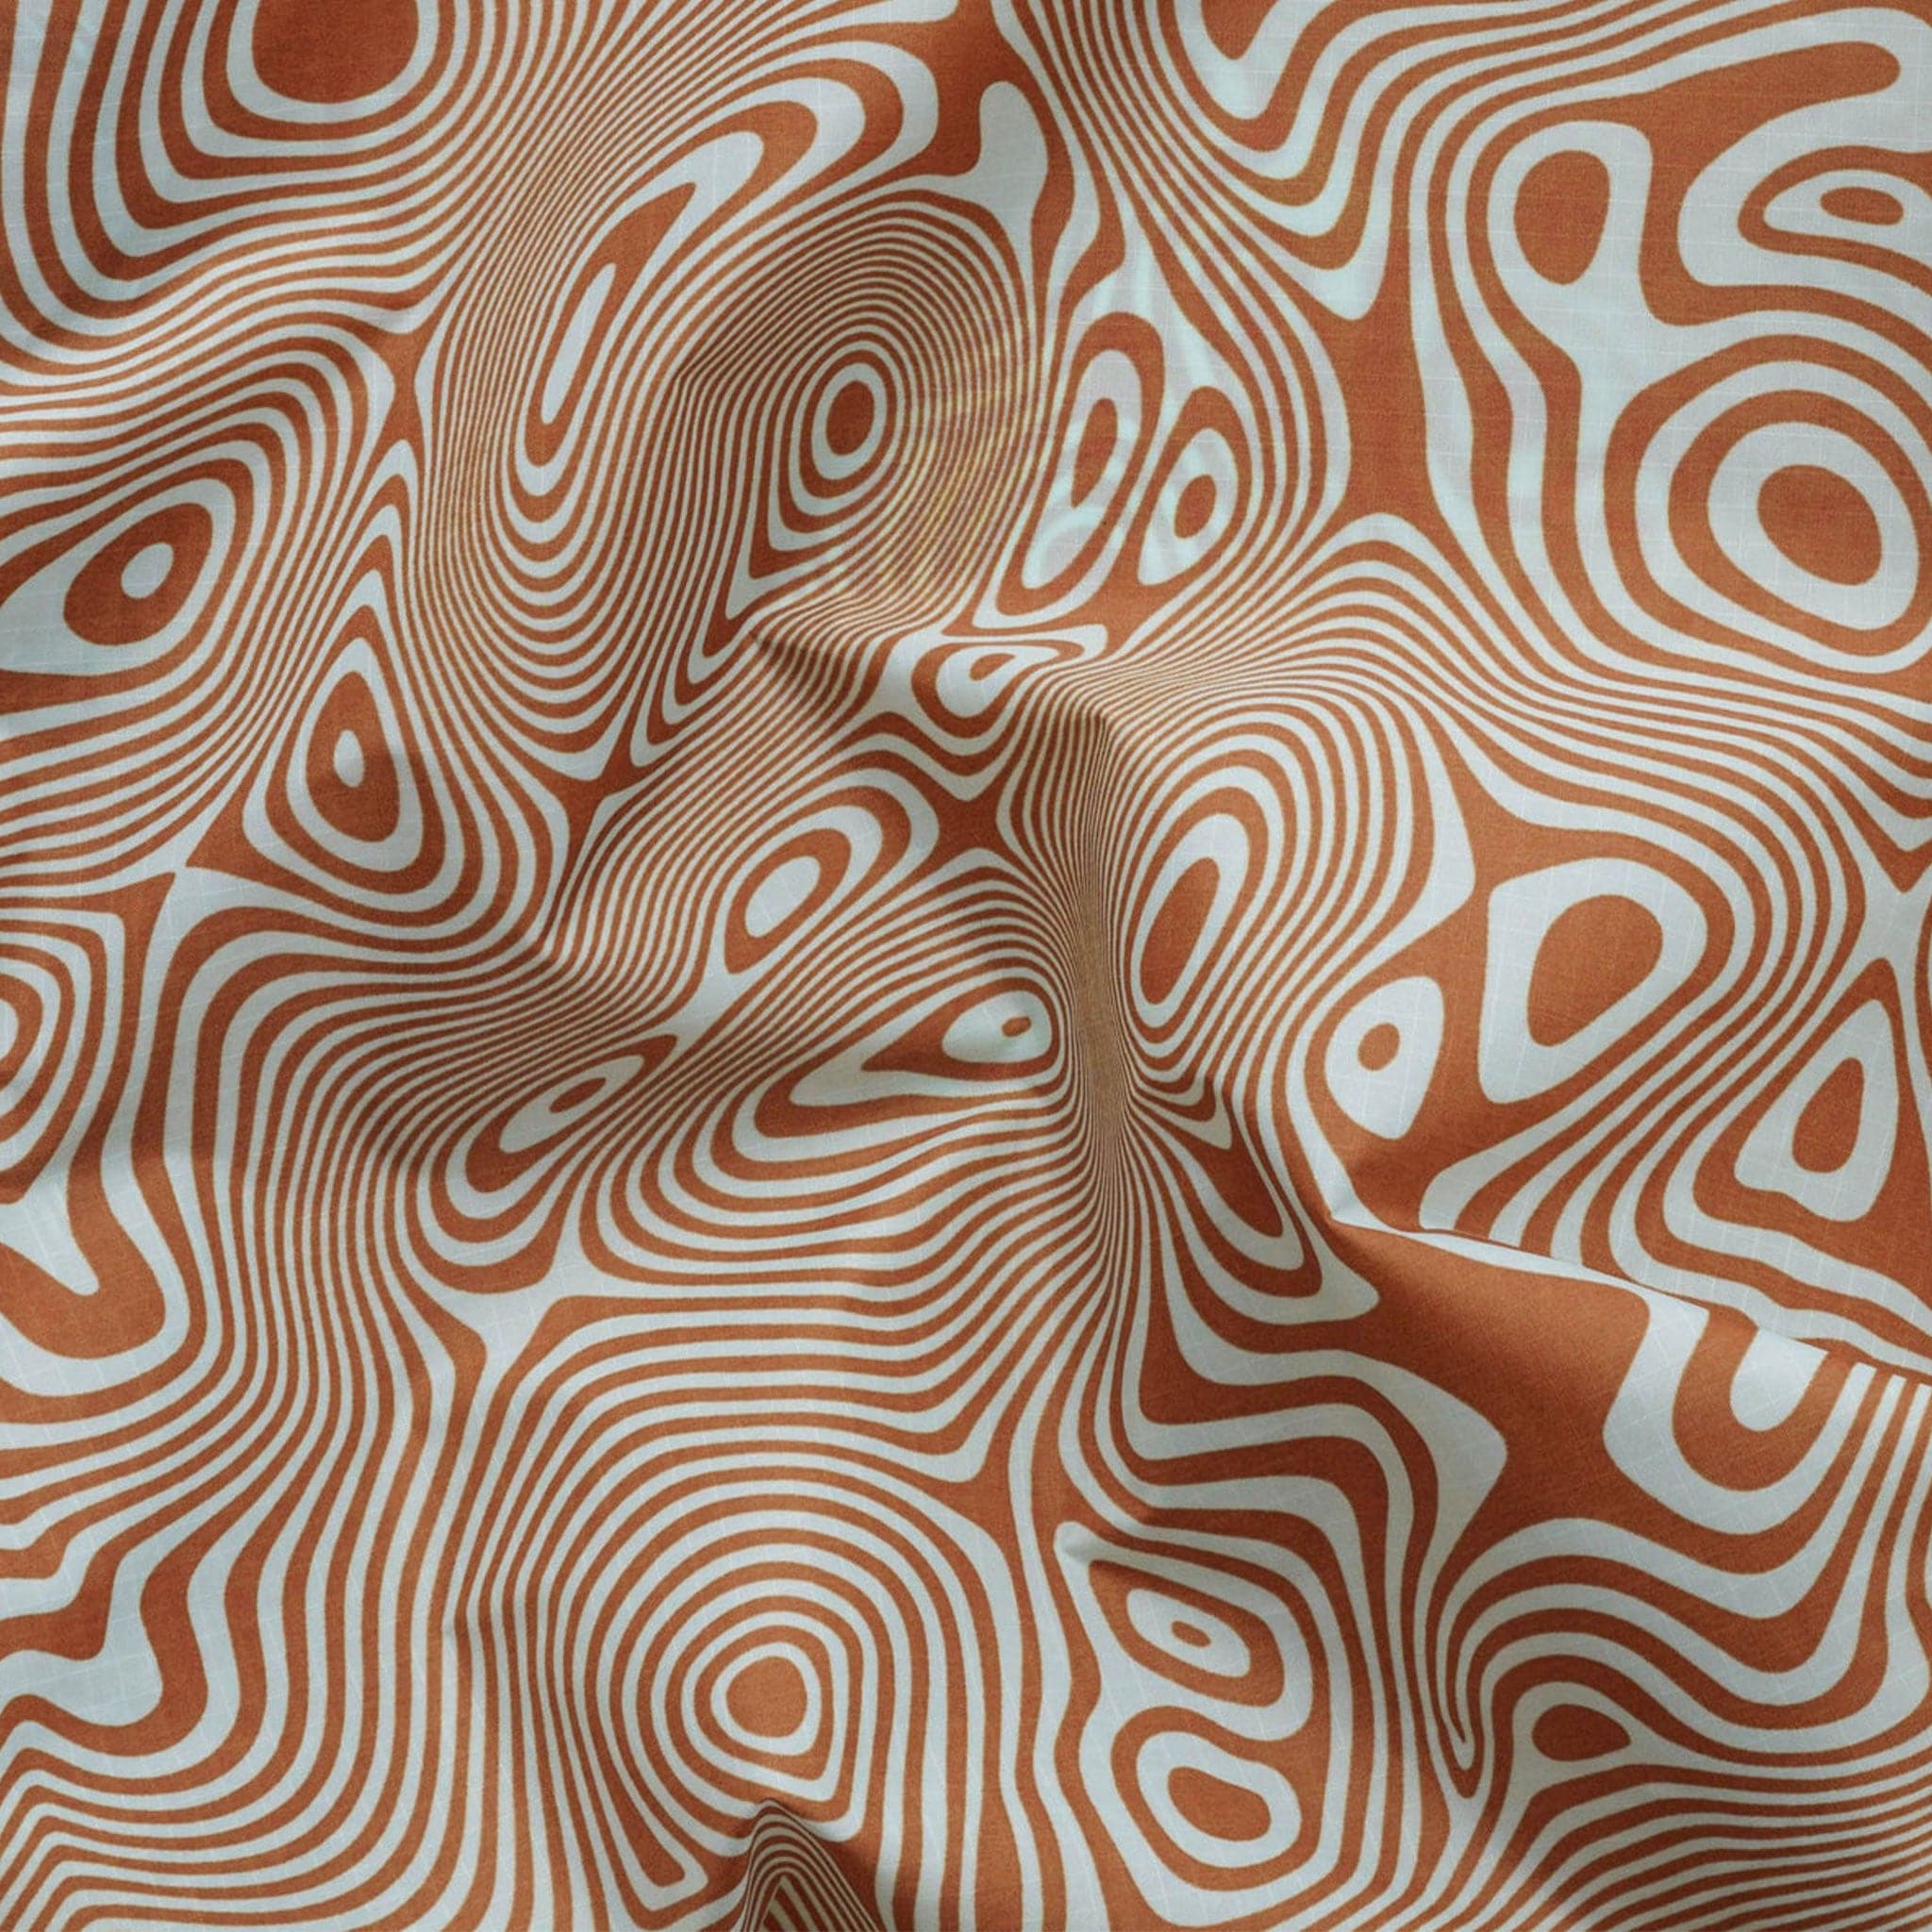 A nylon bag with an orange and cream wavy swirl pattern all over.